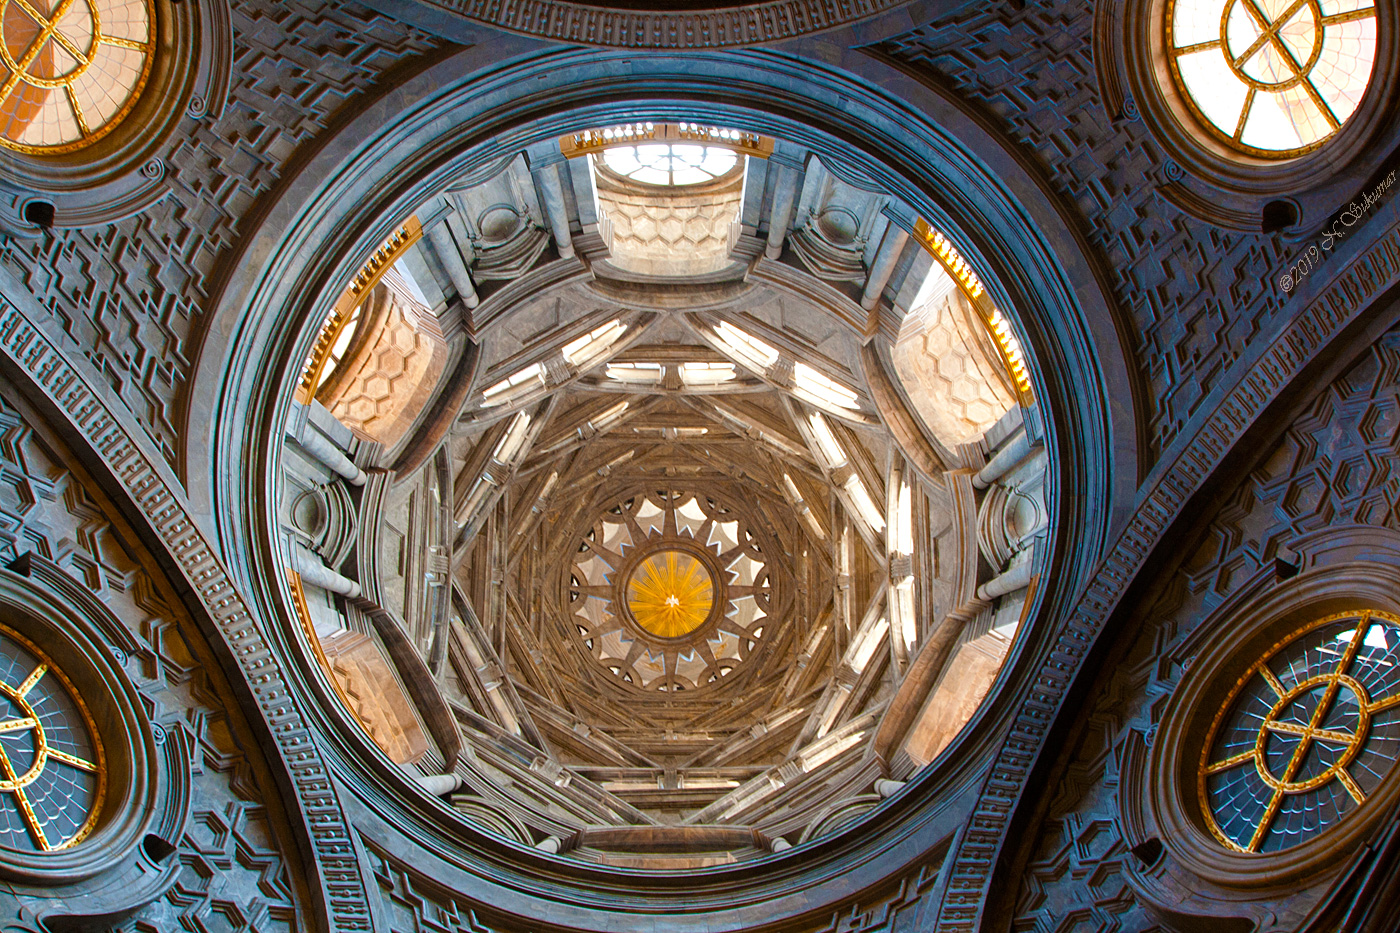 Dome of the Chapel of the Holy Shroud, Turin Cathedral by N. Sukumar, APSA